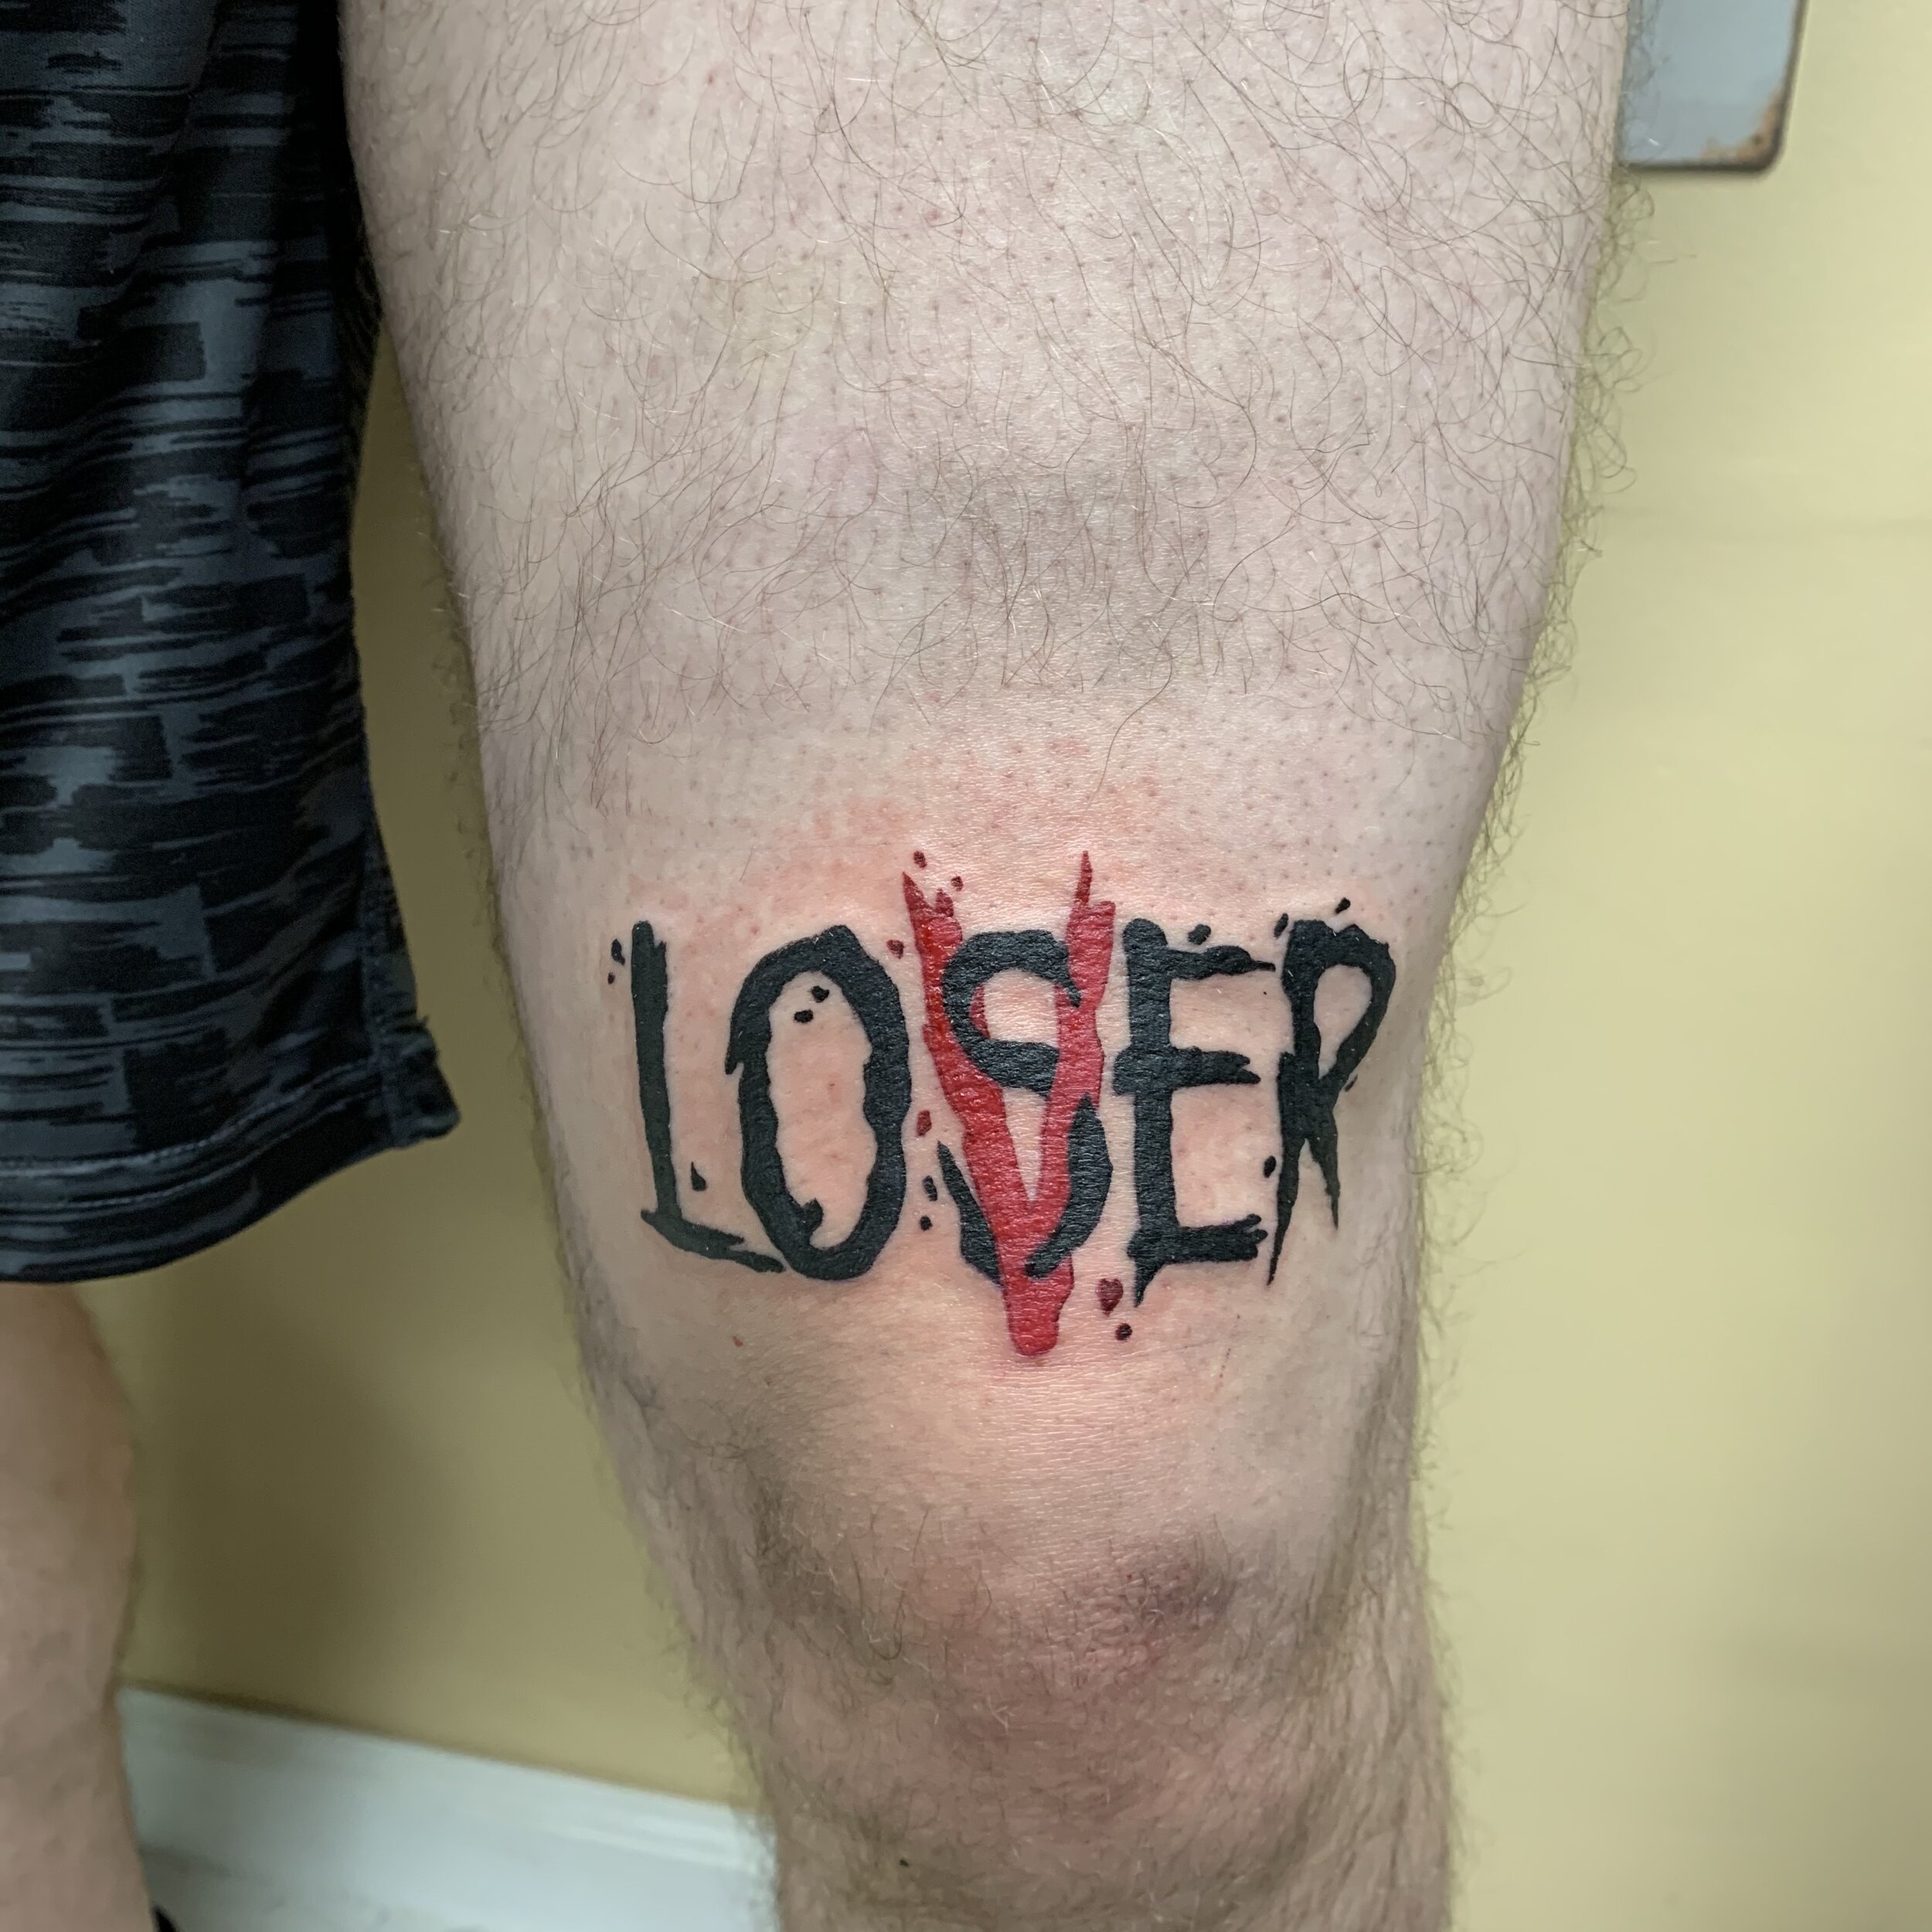 Tattoo uploaded by Virginia  Welcome to the Losers Club        tattoo ink tattoopavia tattoomilano script it itmovie pennywise  pennywisetheclown dancingclown cartoon cartoontattoo illustration  illustrationtattoo illustrative 